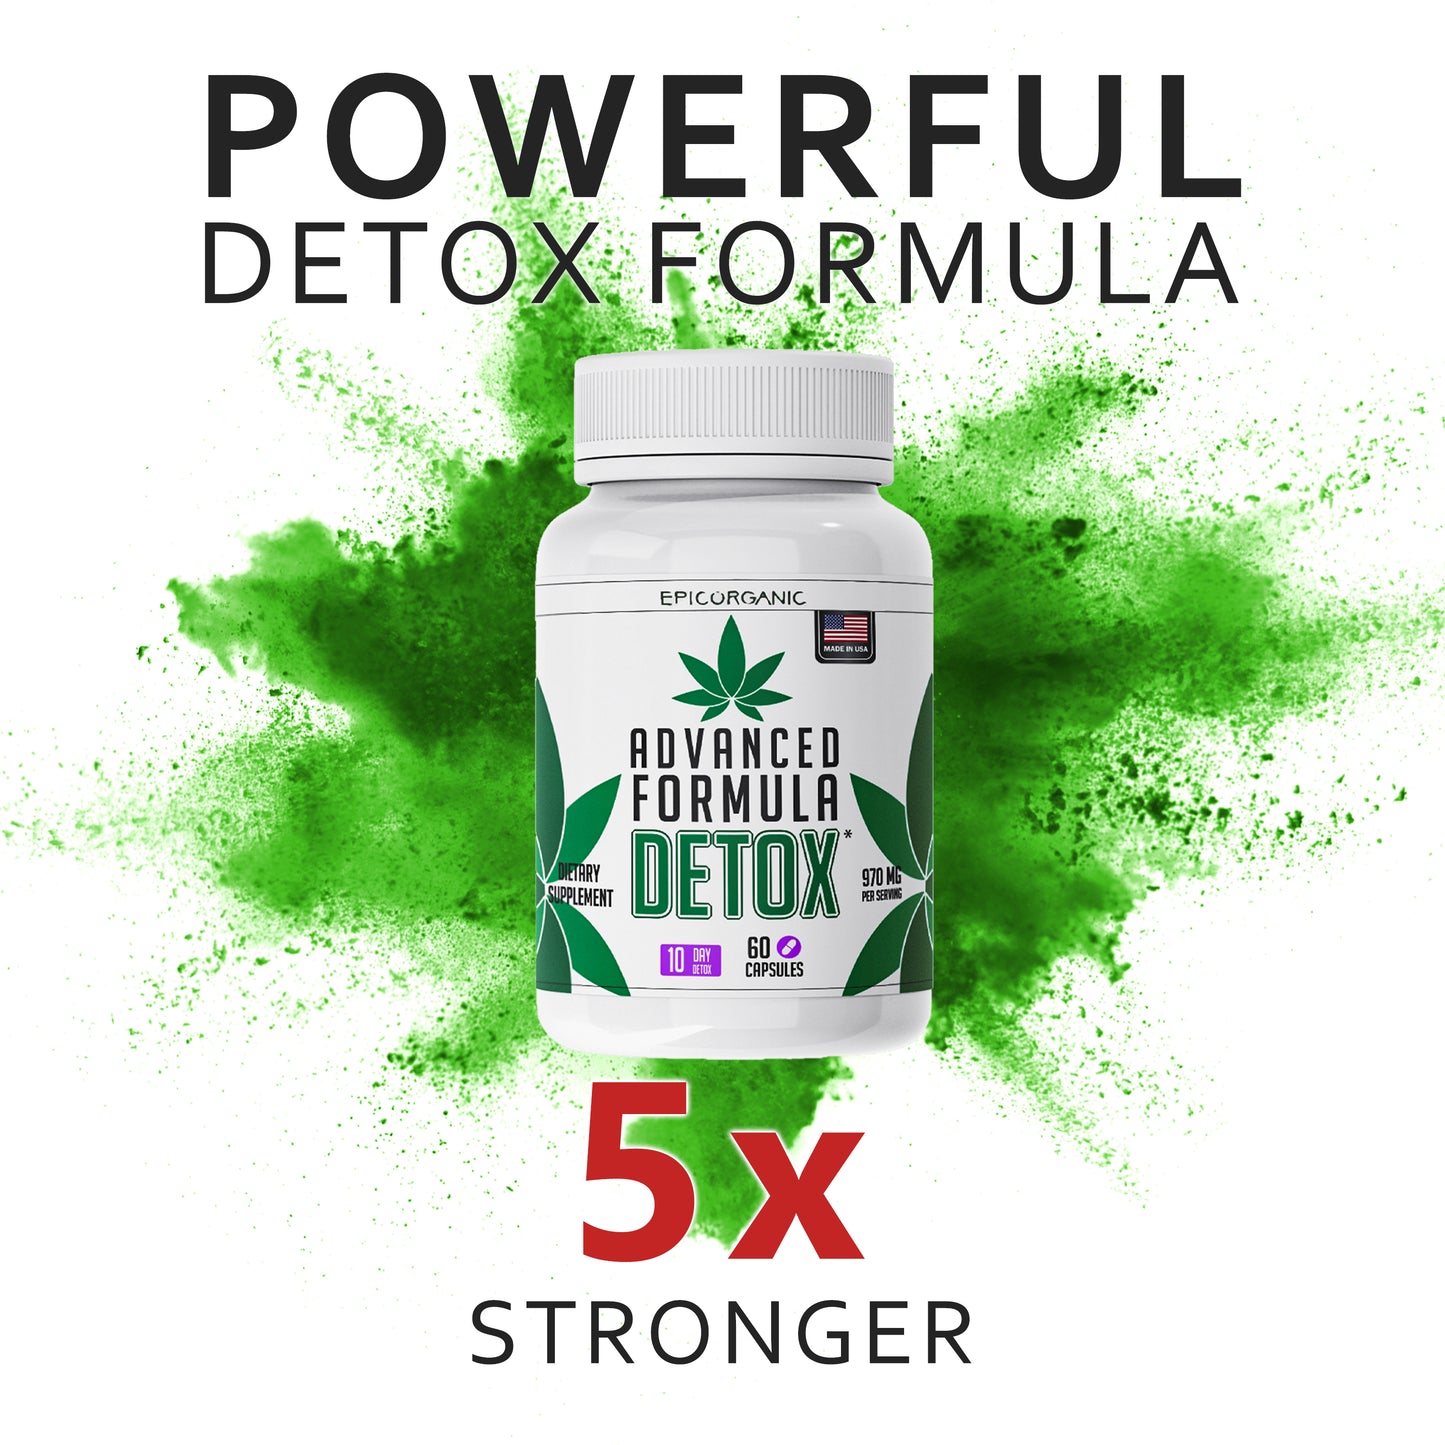 DAILY DETOX CLEANSE Epic Organic